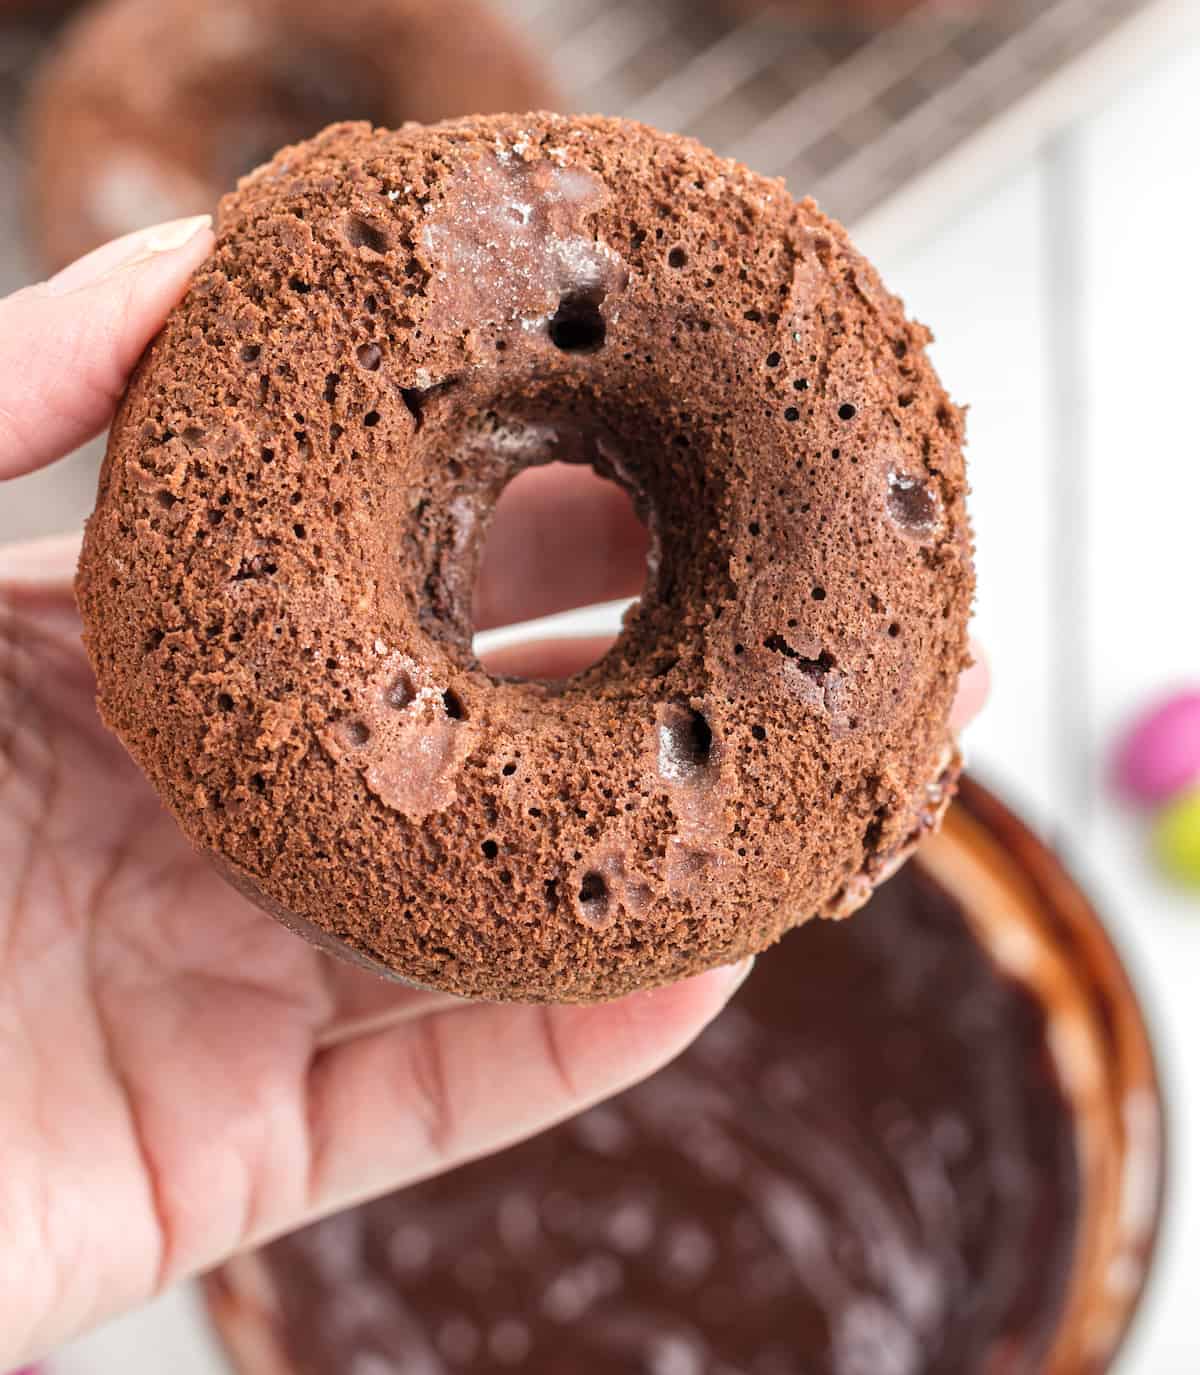 chocolate donut held in a hand